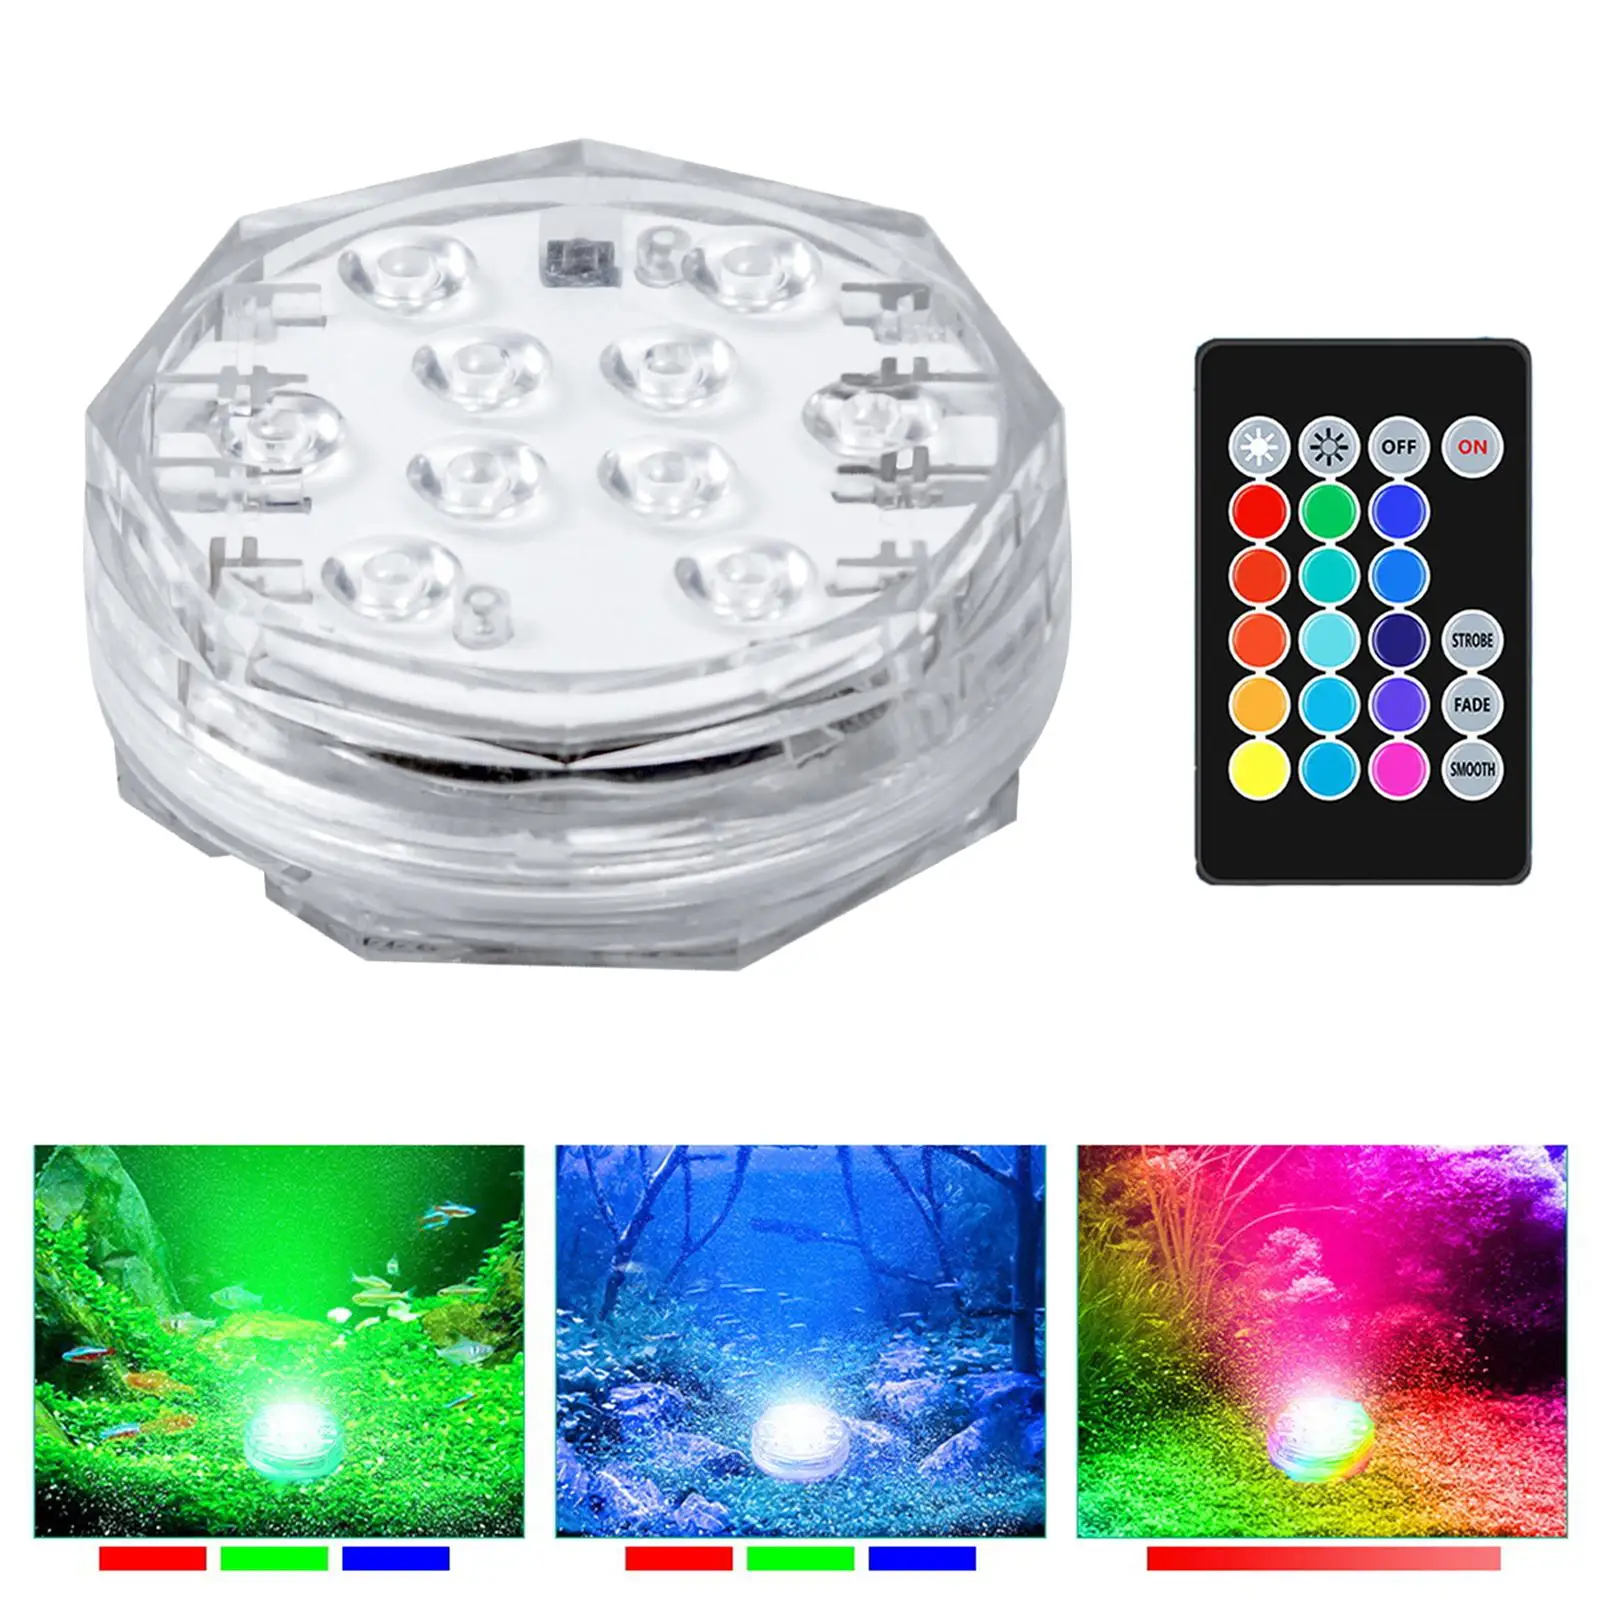 Multicolor Submersible LED Light Battery Operated  Pond Lights for Aquarium Christmas Wedding Party  Beach Decoration